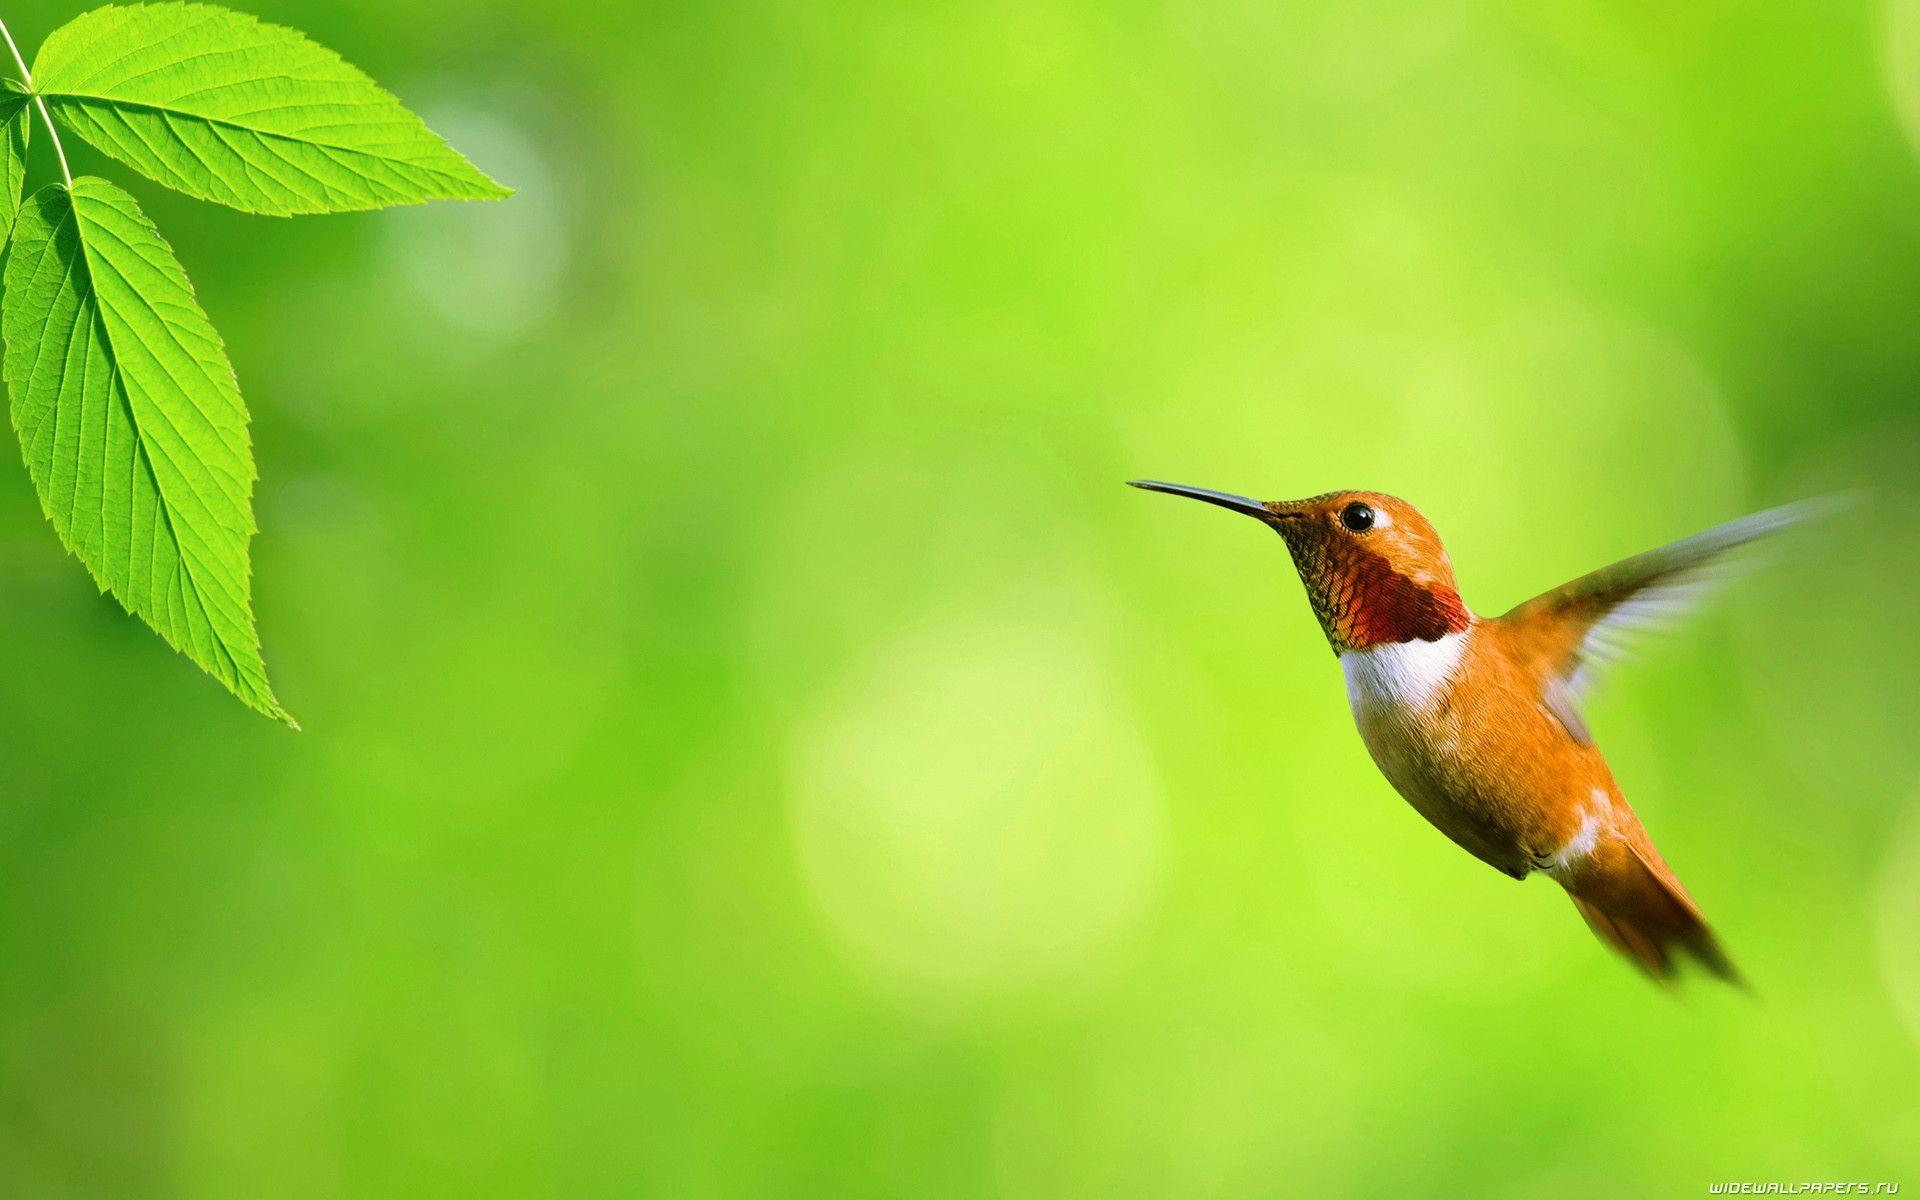 A Selection Of 10 Image Of Birds In Hd Quality - Humming Birds Hd - HD Wallpaper 